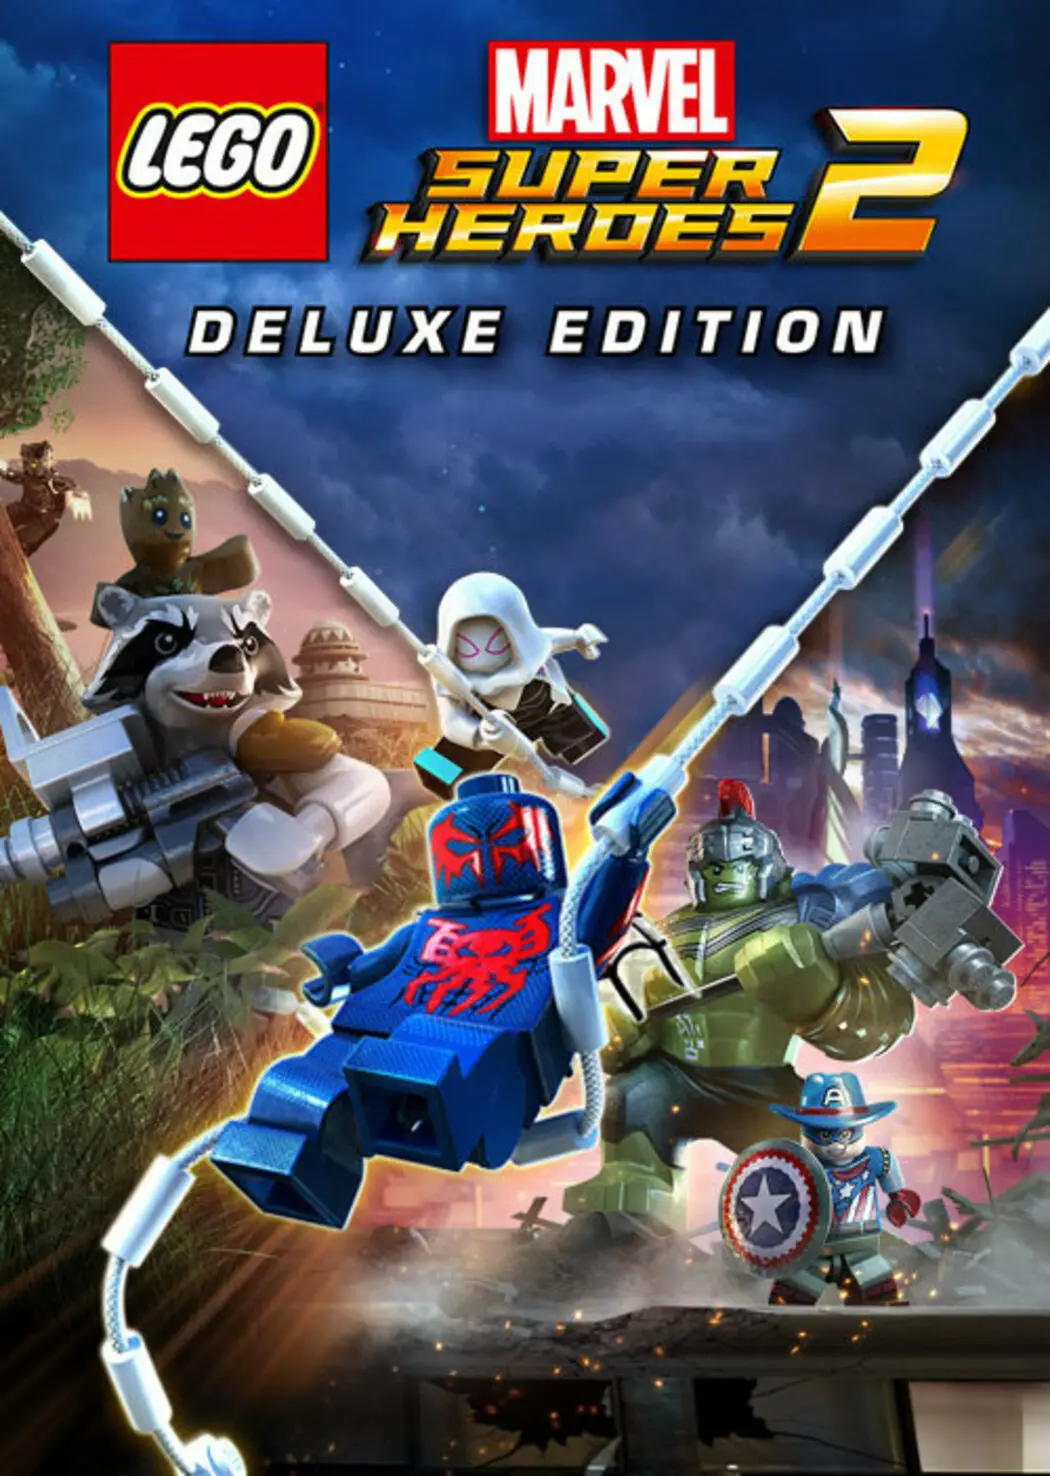 LEGO: Marvel Super Heroes 2 Deluxe Edition (AR) (Xbox One / Xbox Series X|S) - Xbox Live - Digital Code